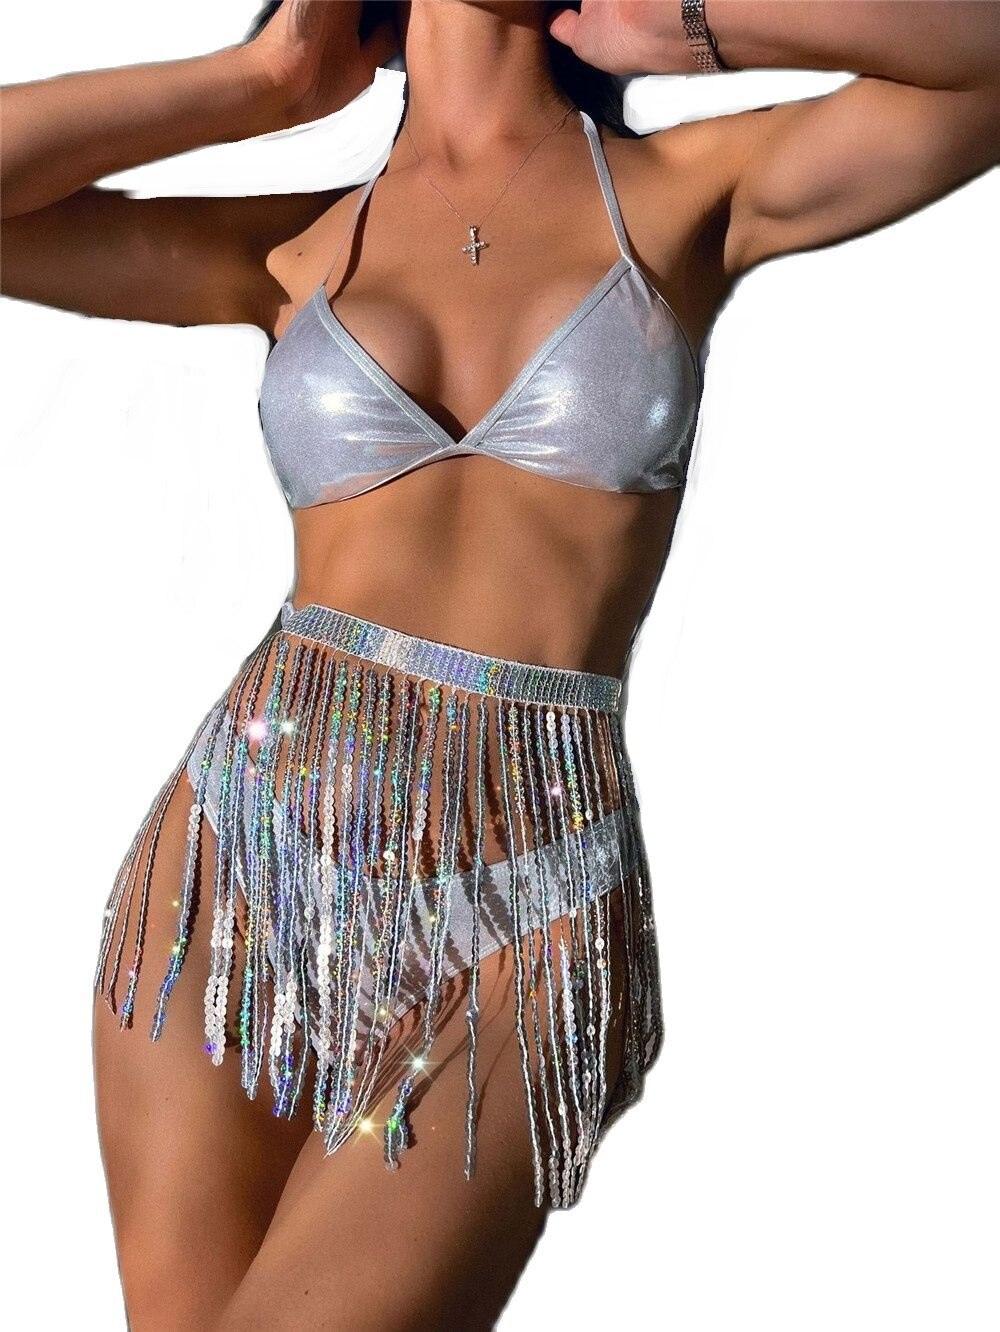 Glitter Sequins Rave Outfit - IntimGlamour